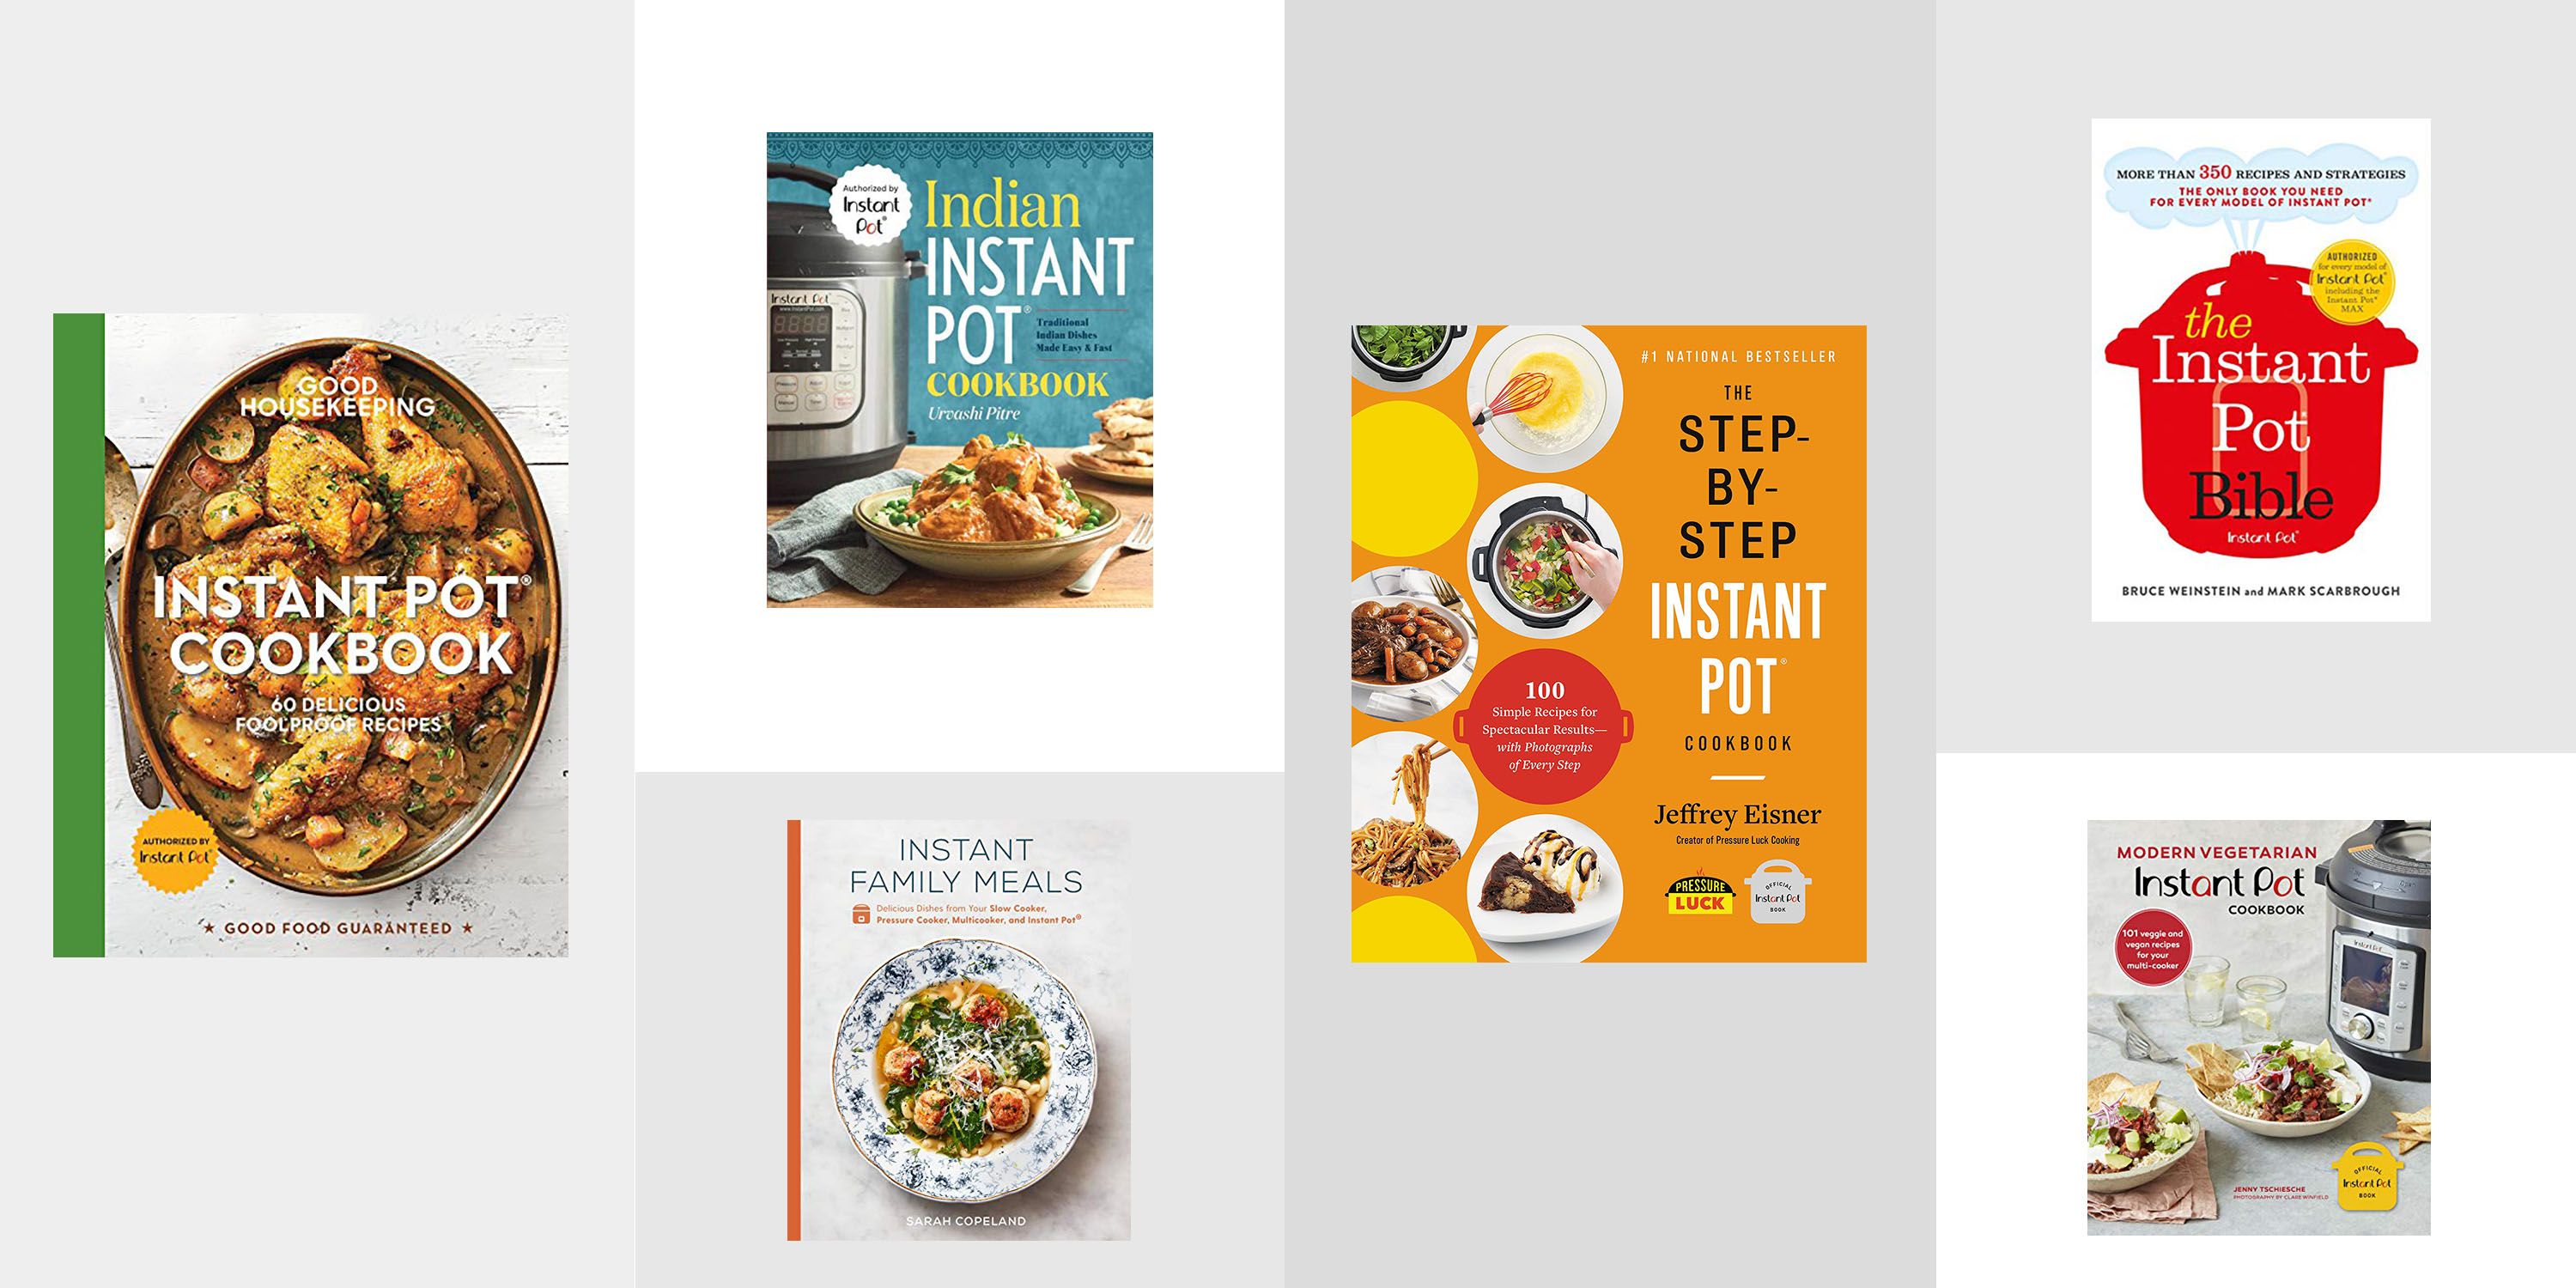 Best Instant Pot Cookbook (Keep It by Gooseberry Patch